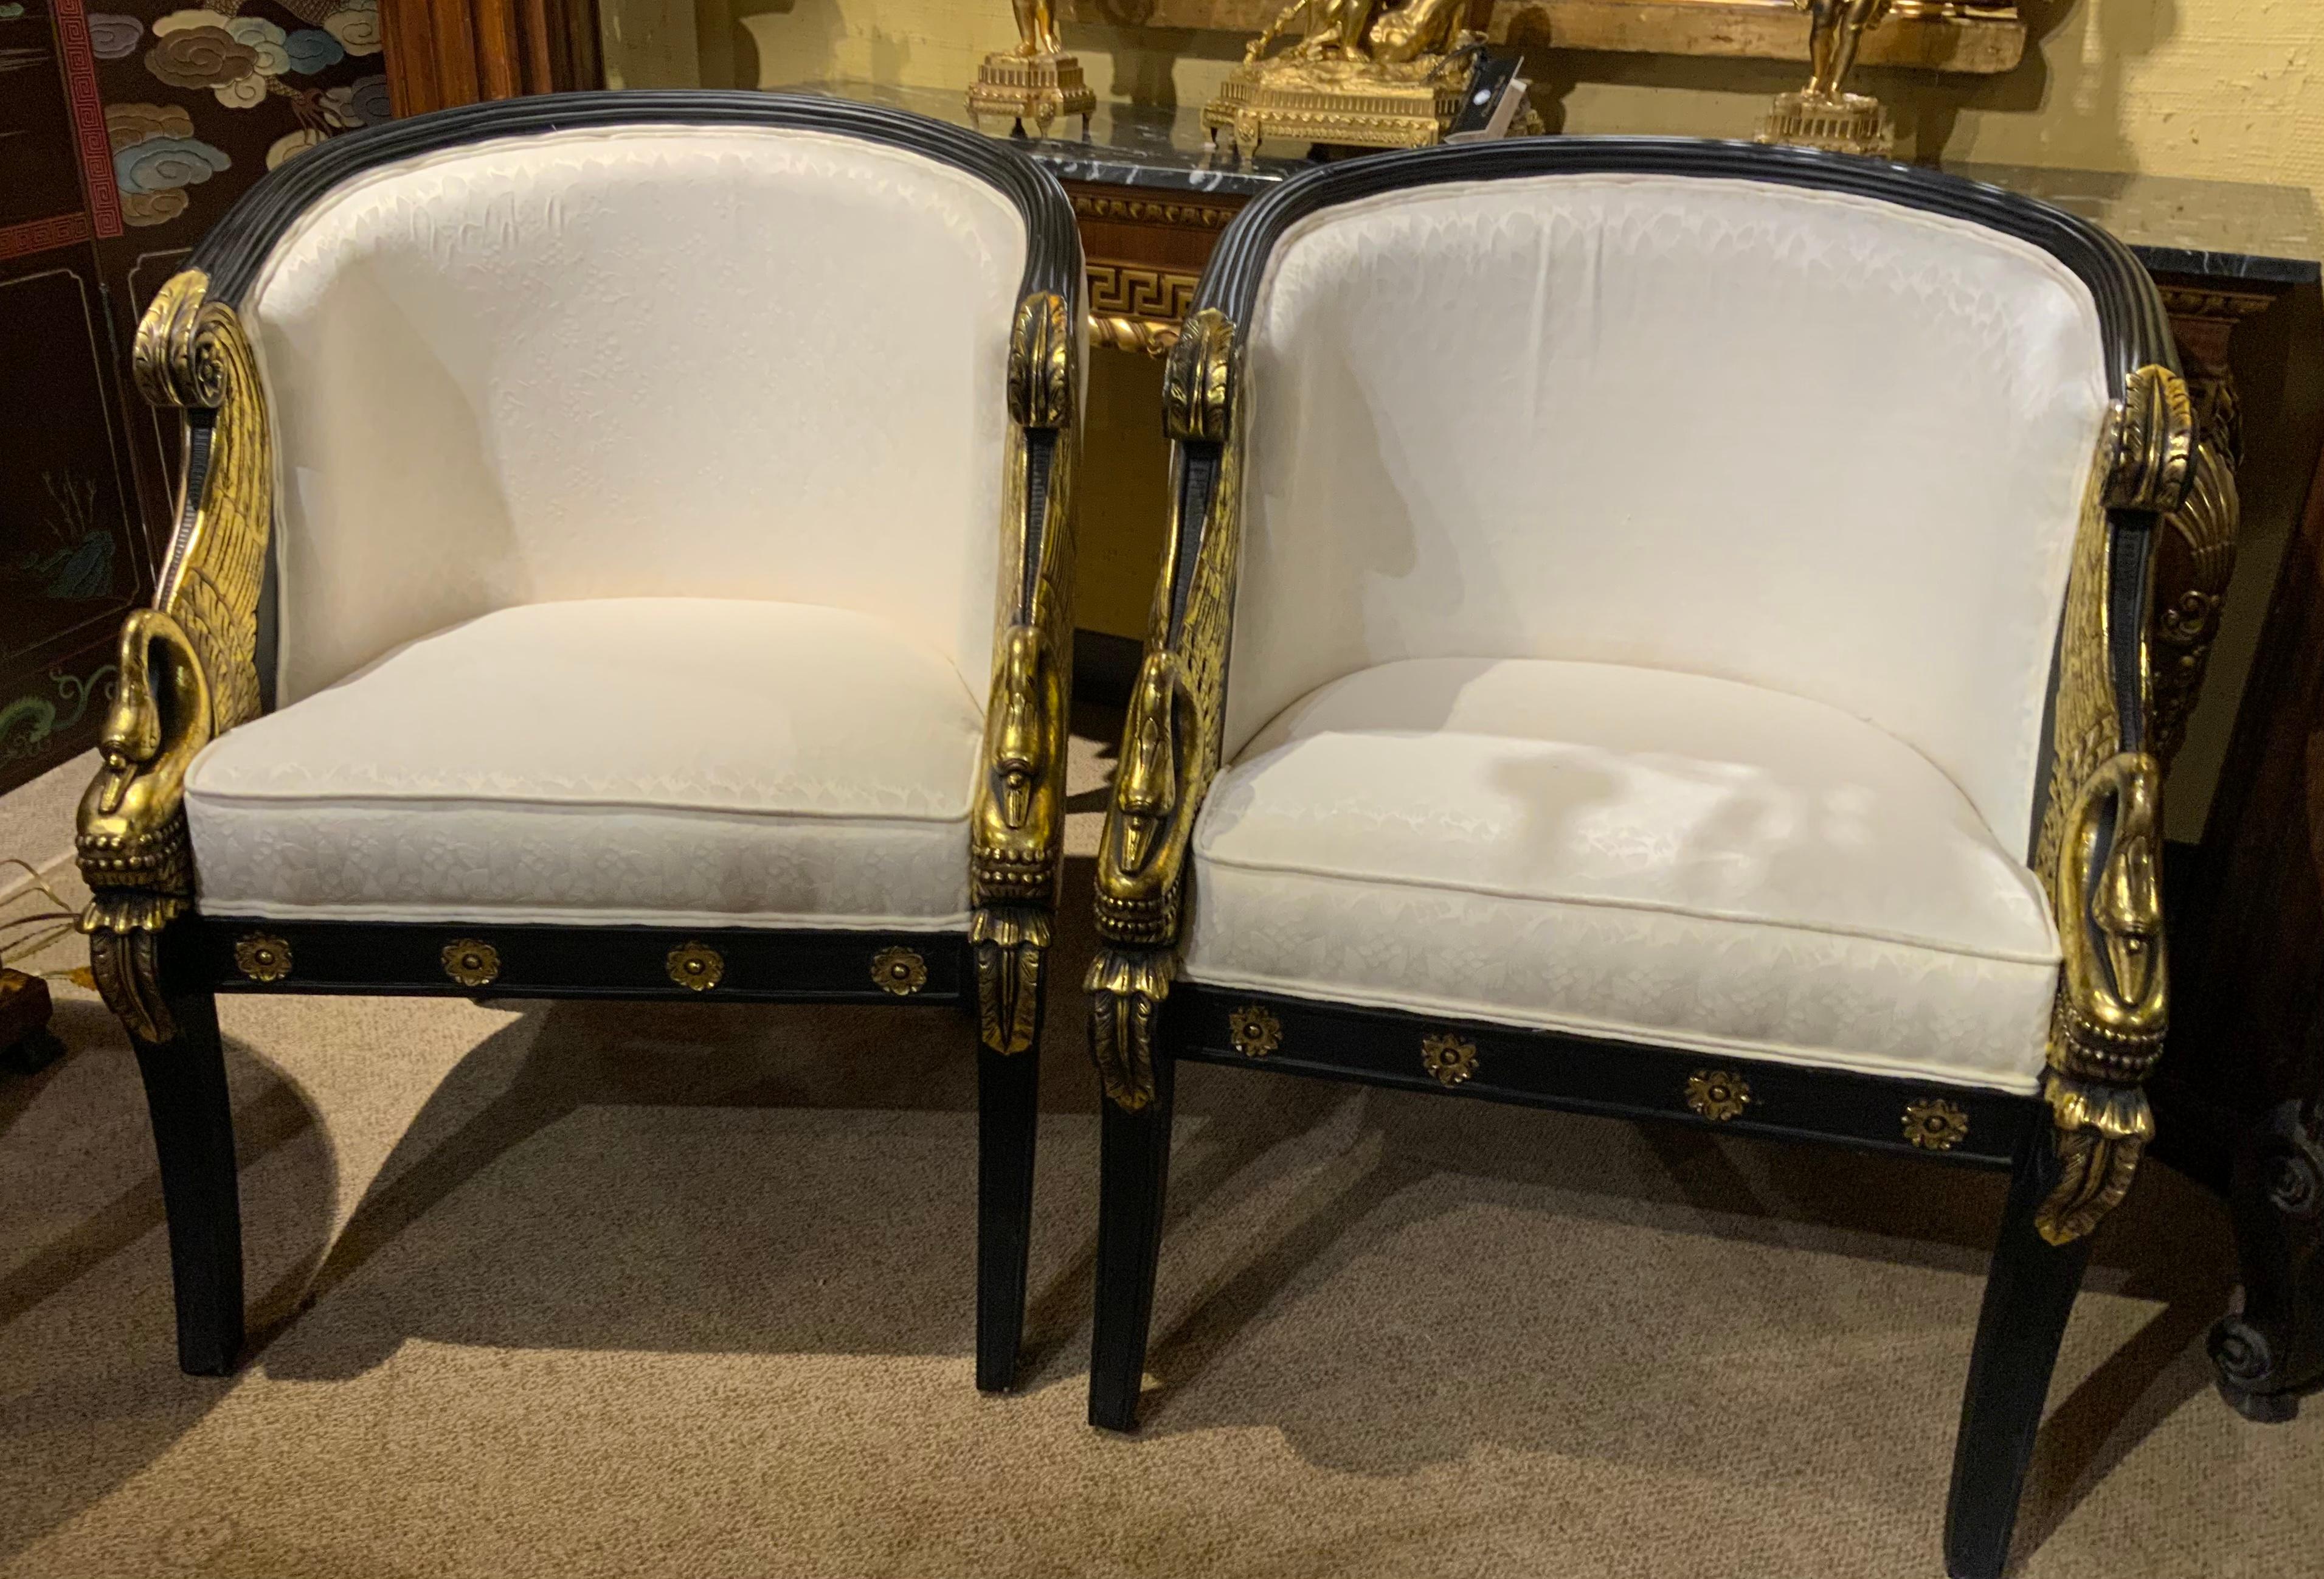 Pair of French Empire-Style Ebonized and Parcel Gilt Bergeres In Good Condition For Sale In Houston, TX